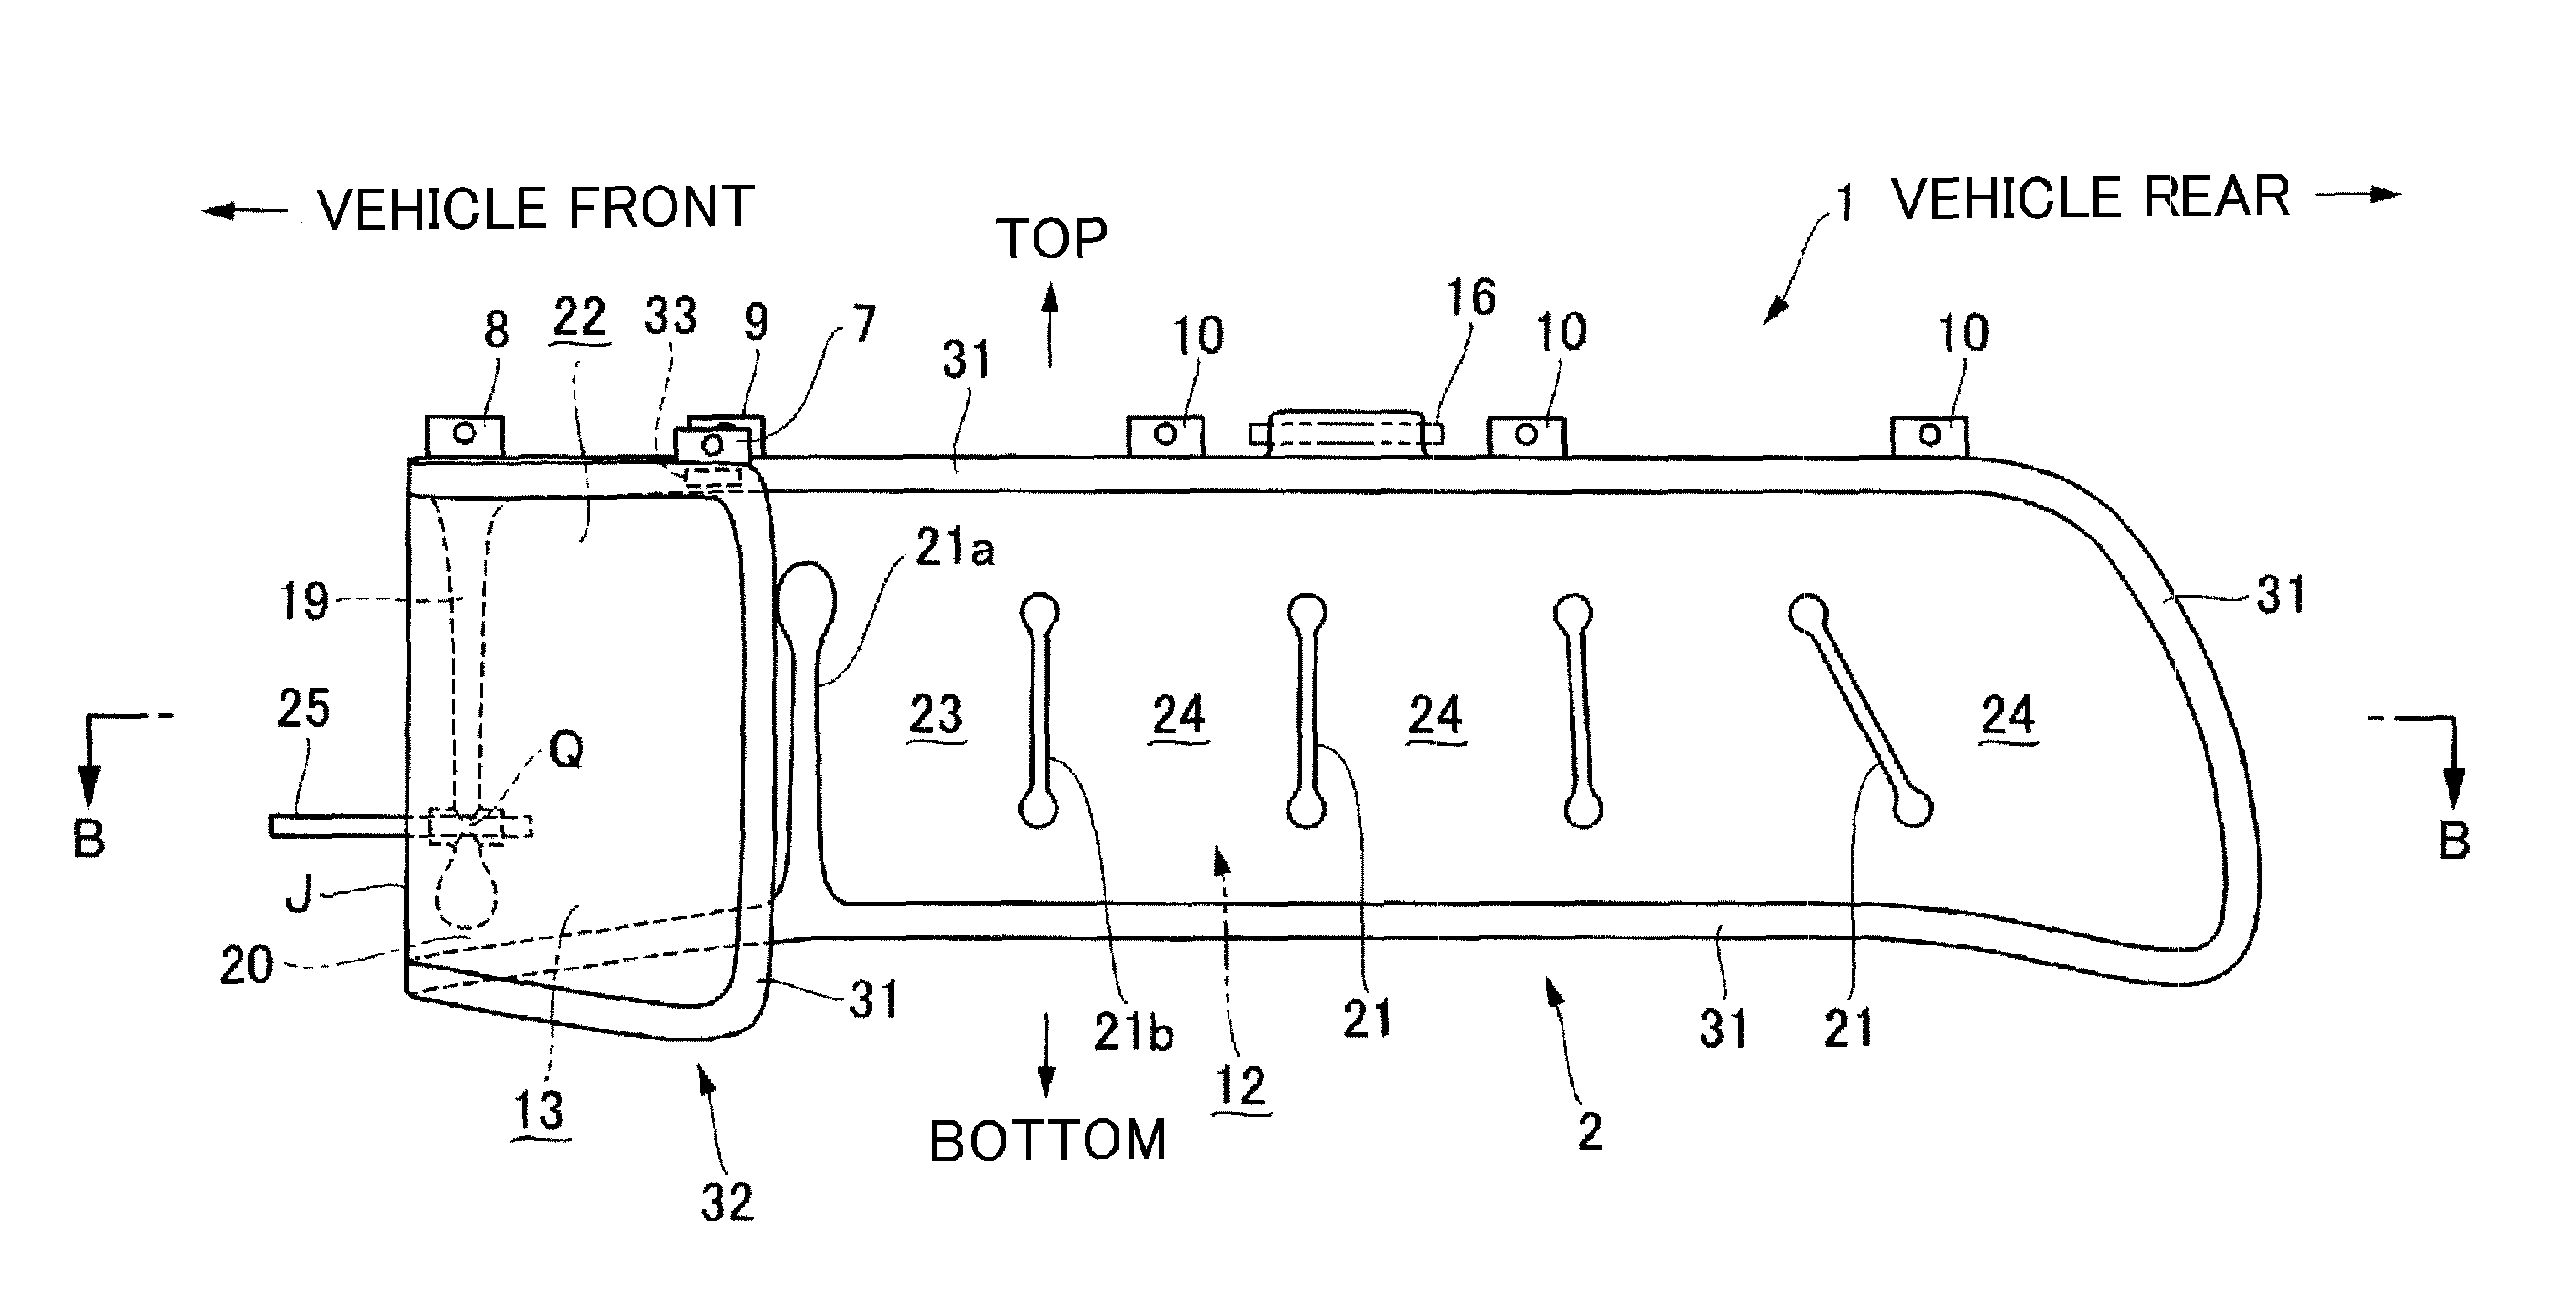 Vehicular curtain air-bag device, and mounting structure for same